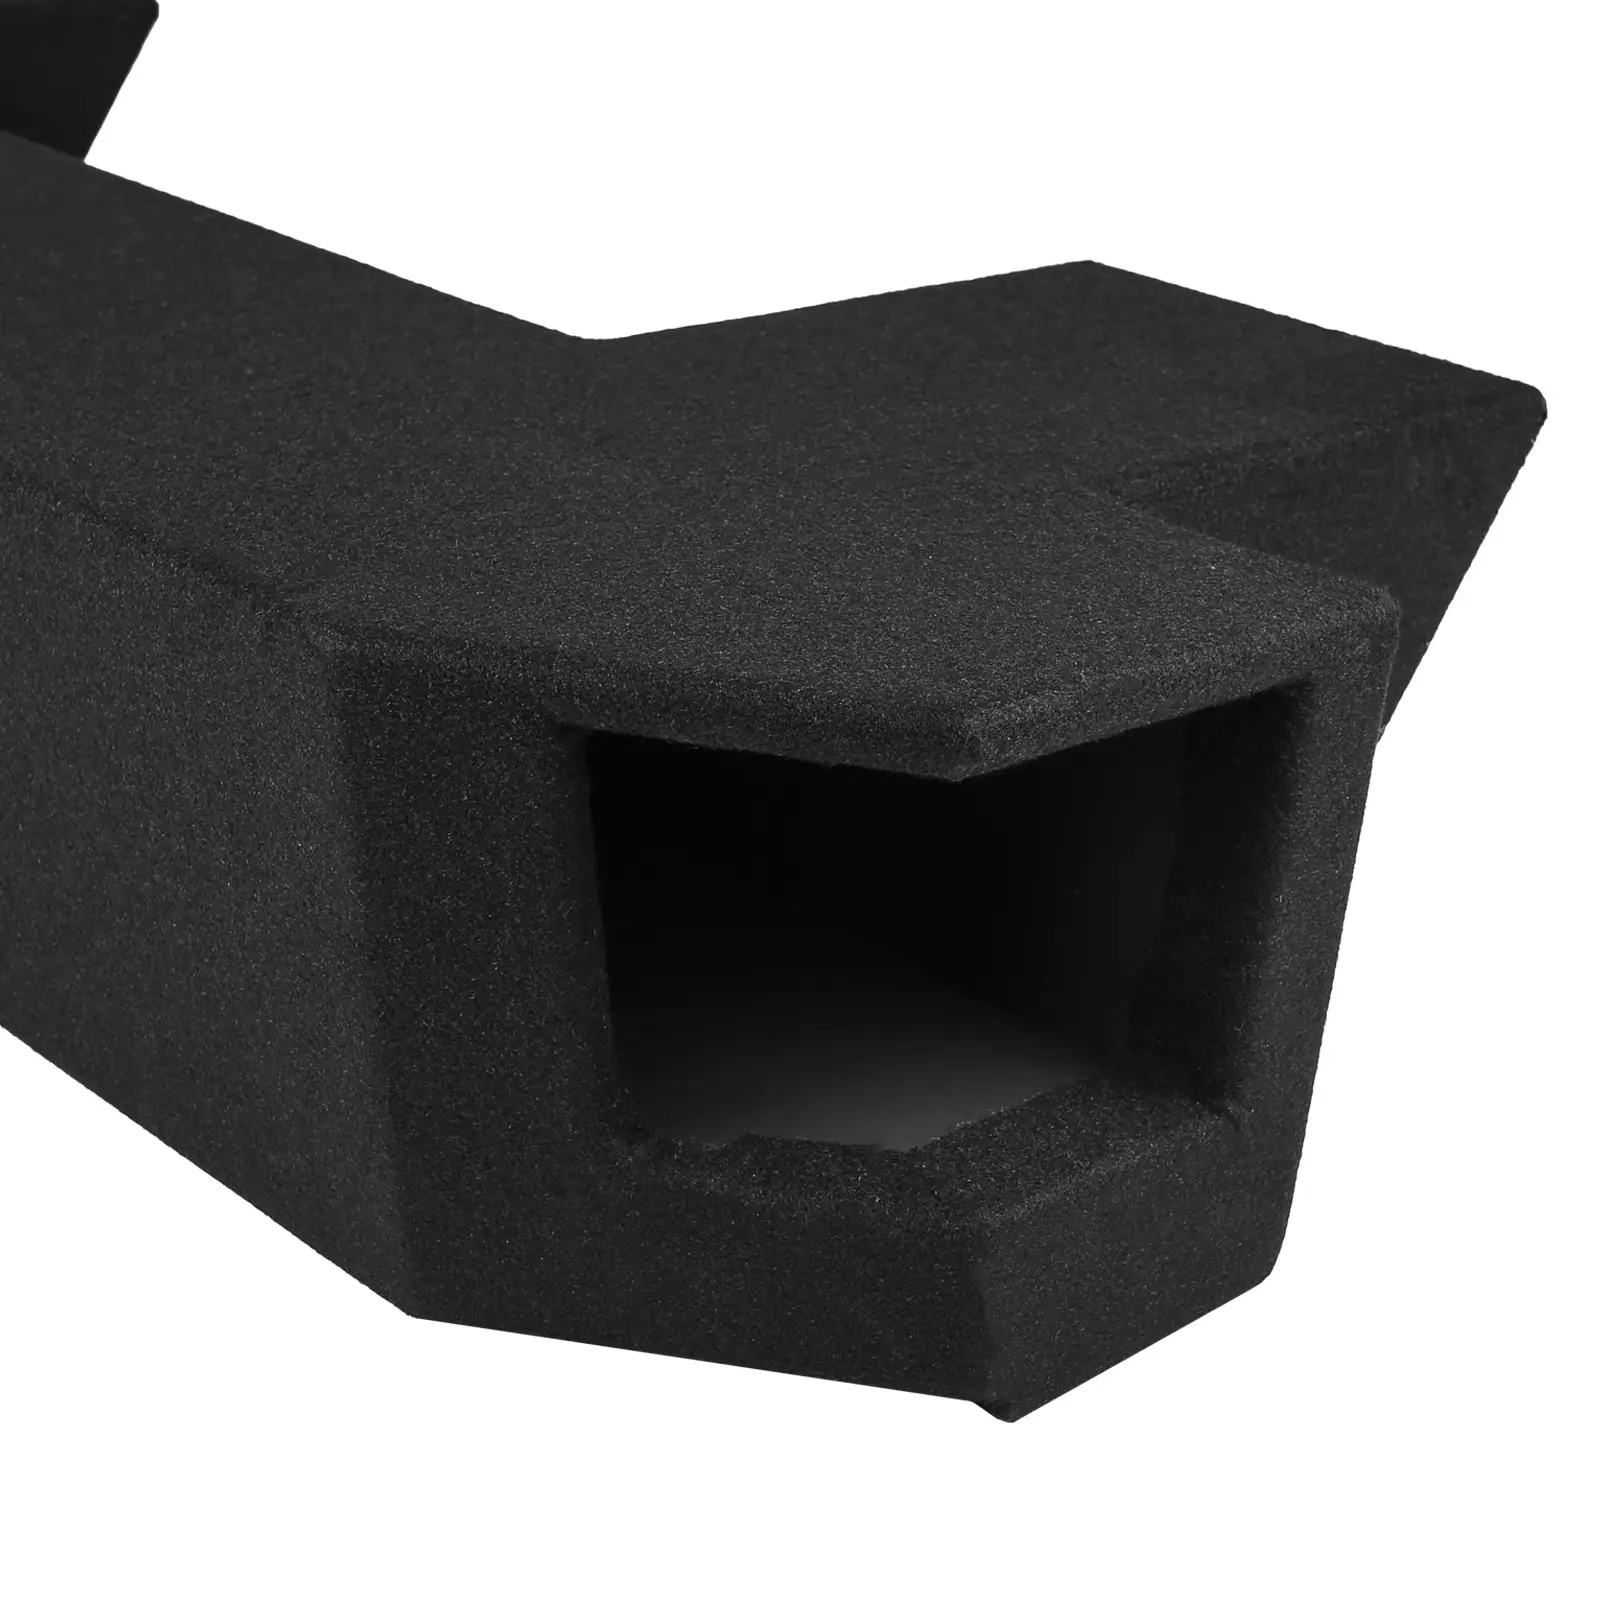 Dual 8" 2,400W Max Power Loaded Subwoofer Enclosure Compatible with 2019-2024 Ram 1500 (5th Gen) Crew Cab Trucks #5